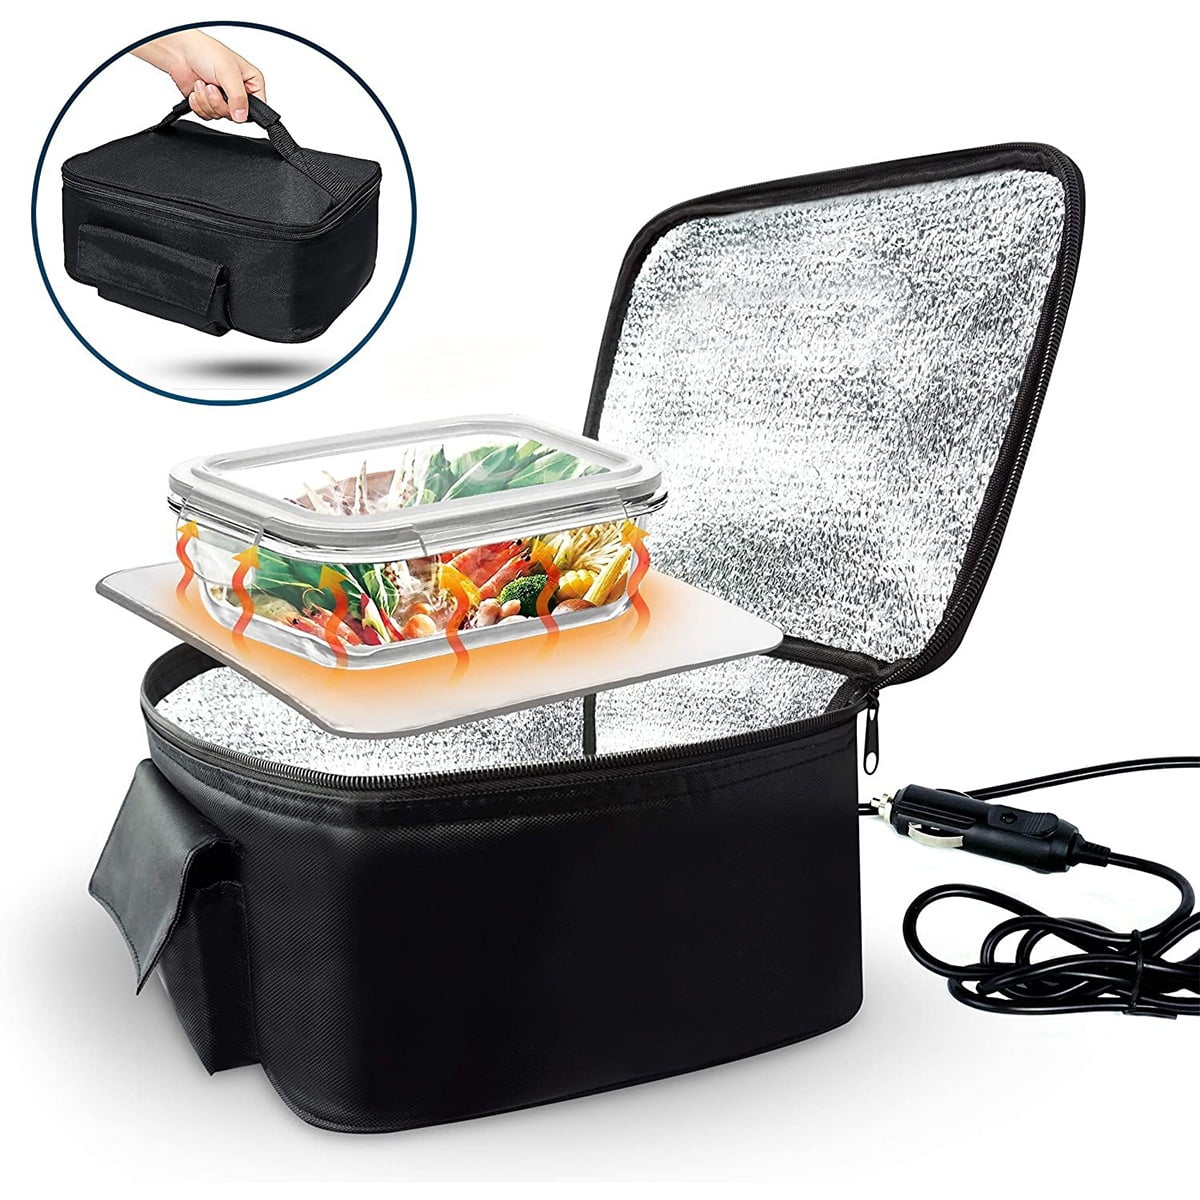 Heating Lunch Box Stove 12V Car Hot Food Meal Warmer Electric Oven For Camping 